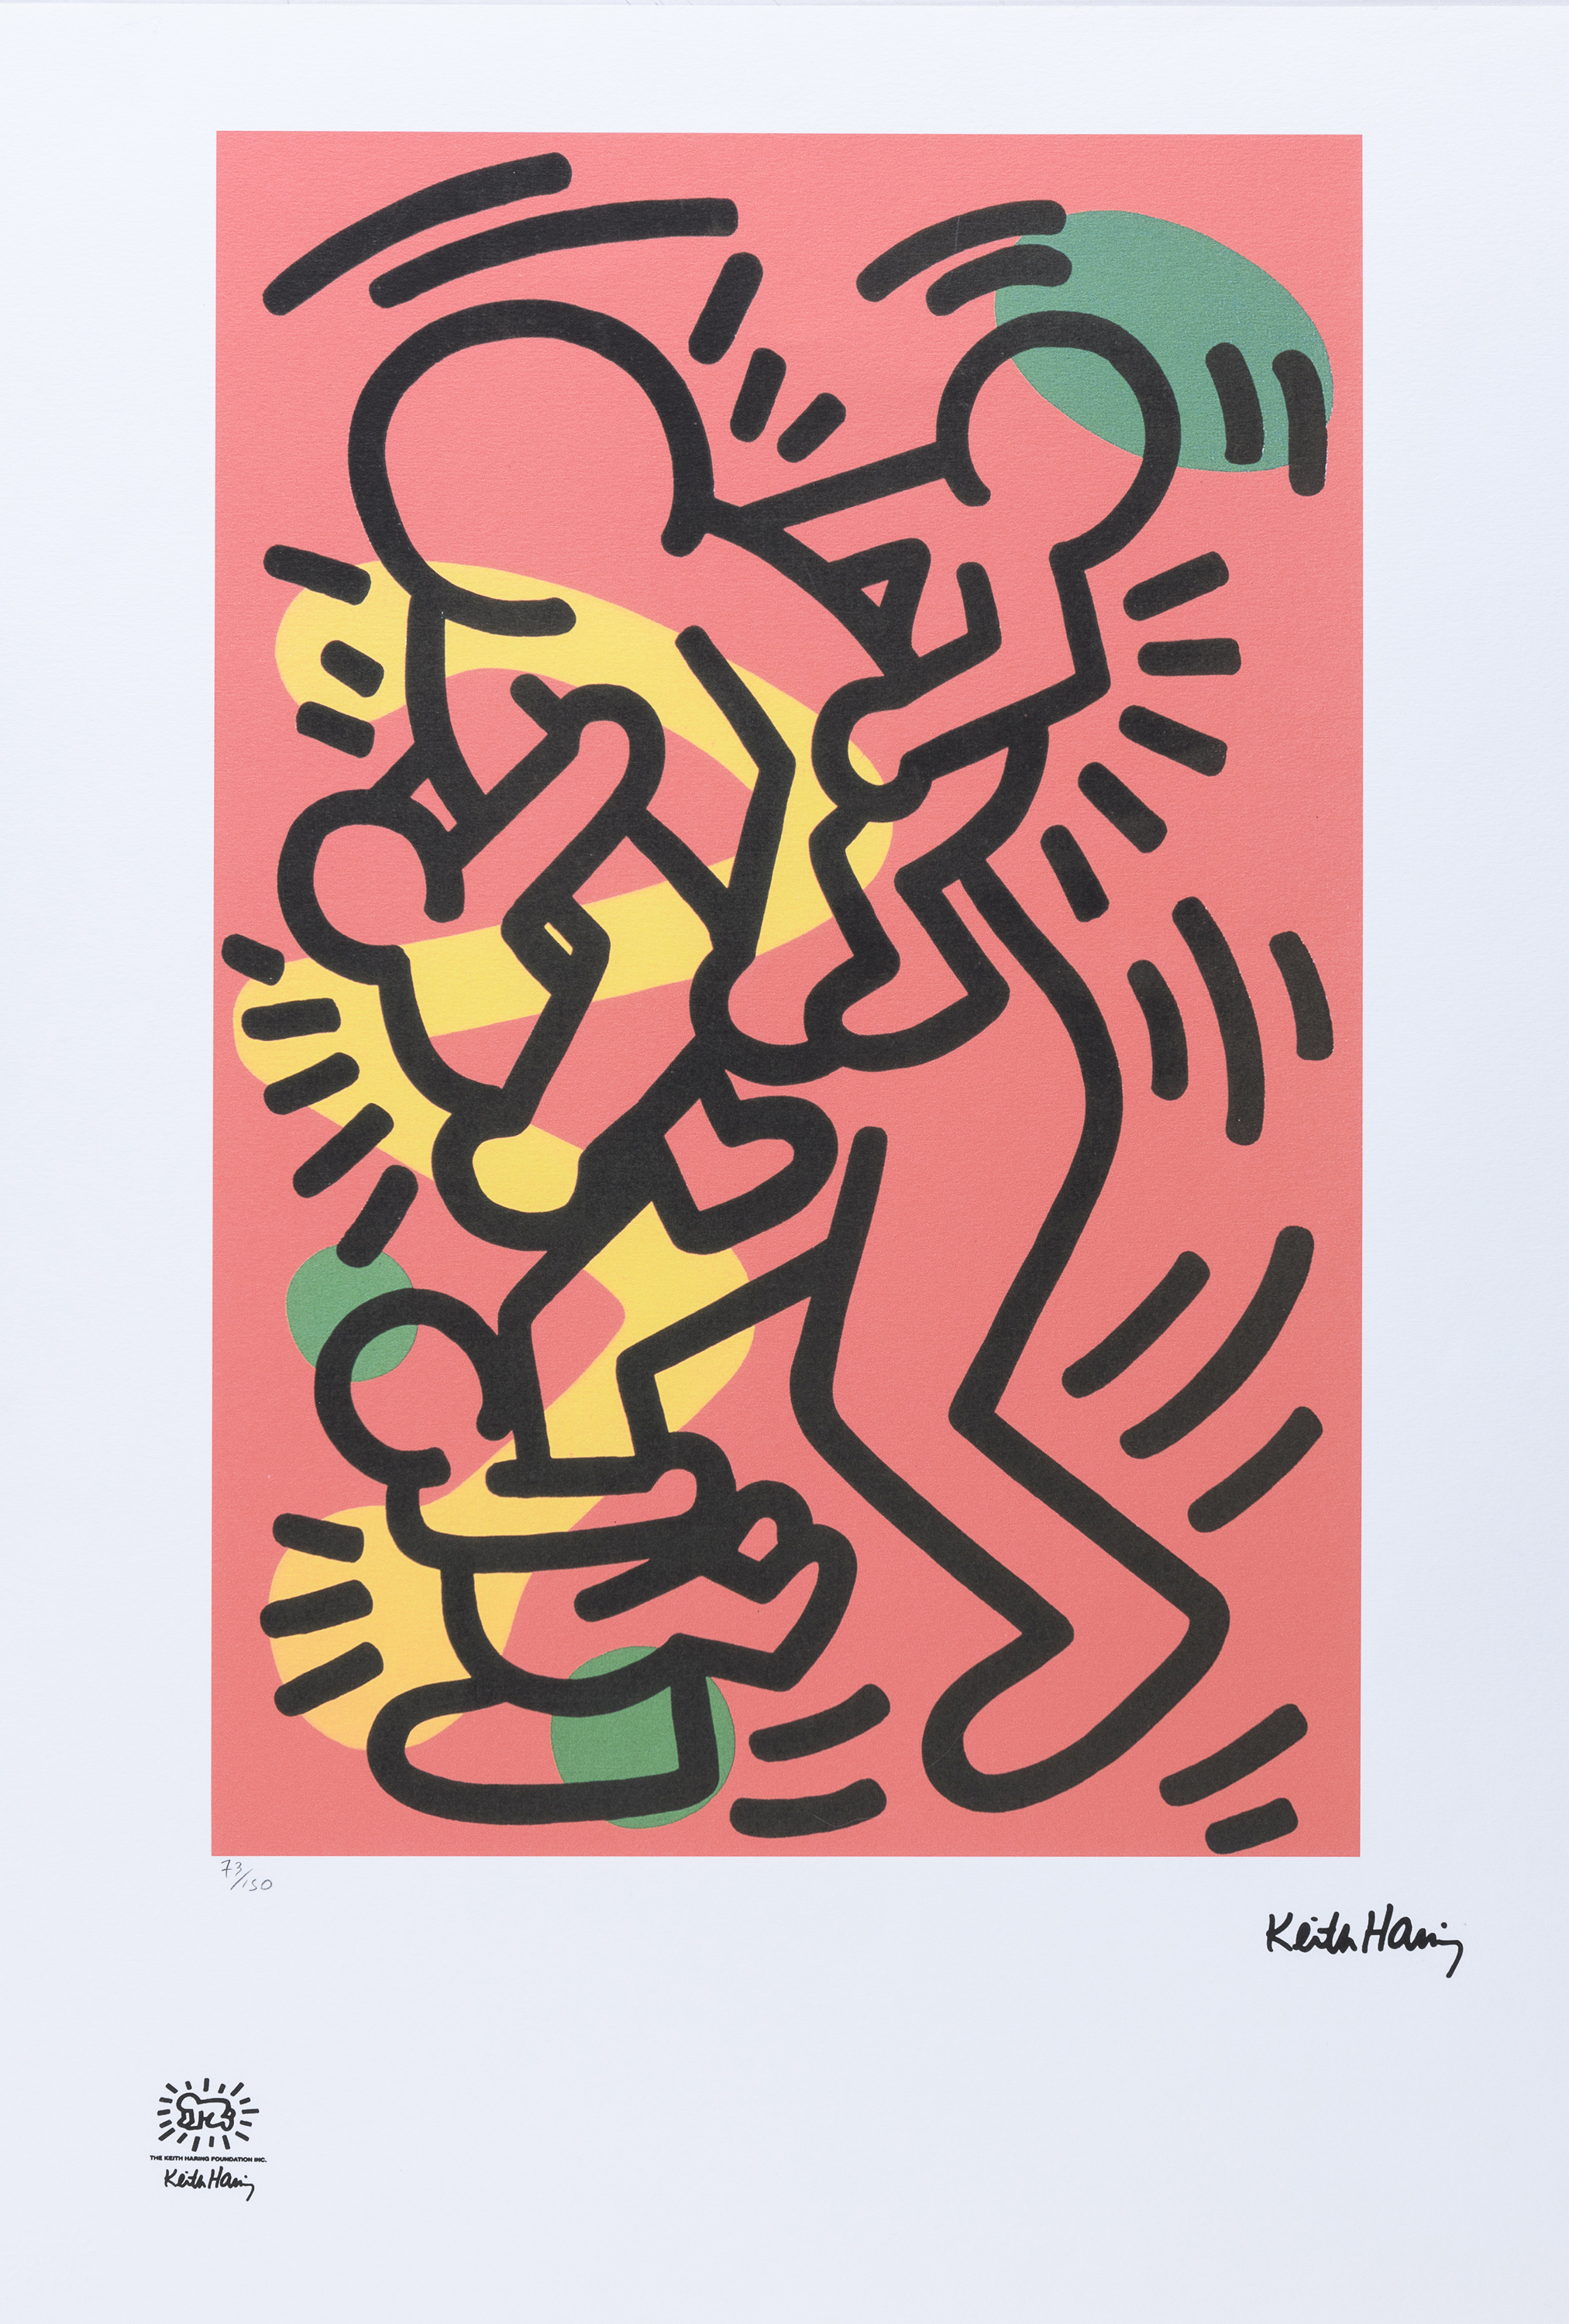 LITHOGRAPH AFTER KEITH HARING 1986/2019